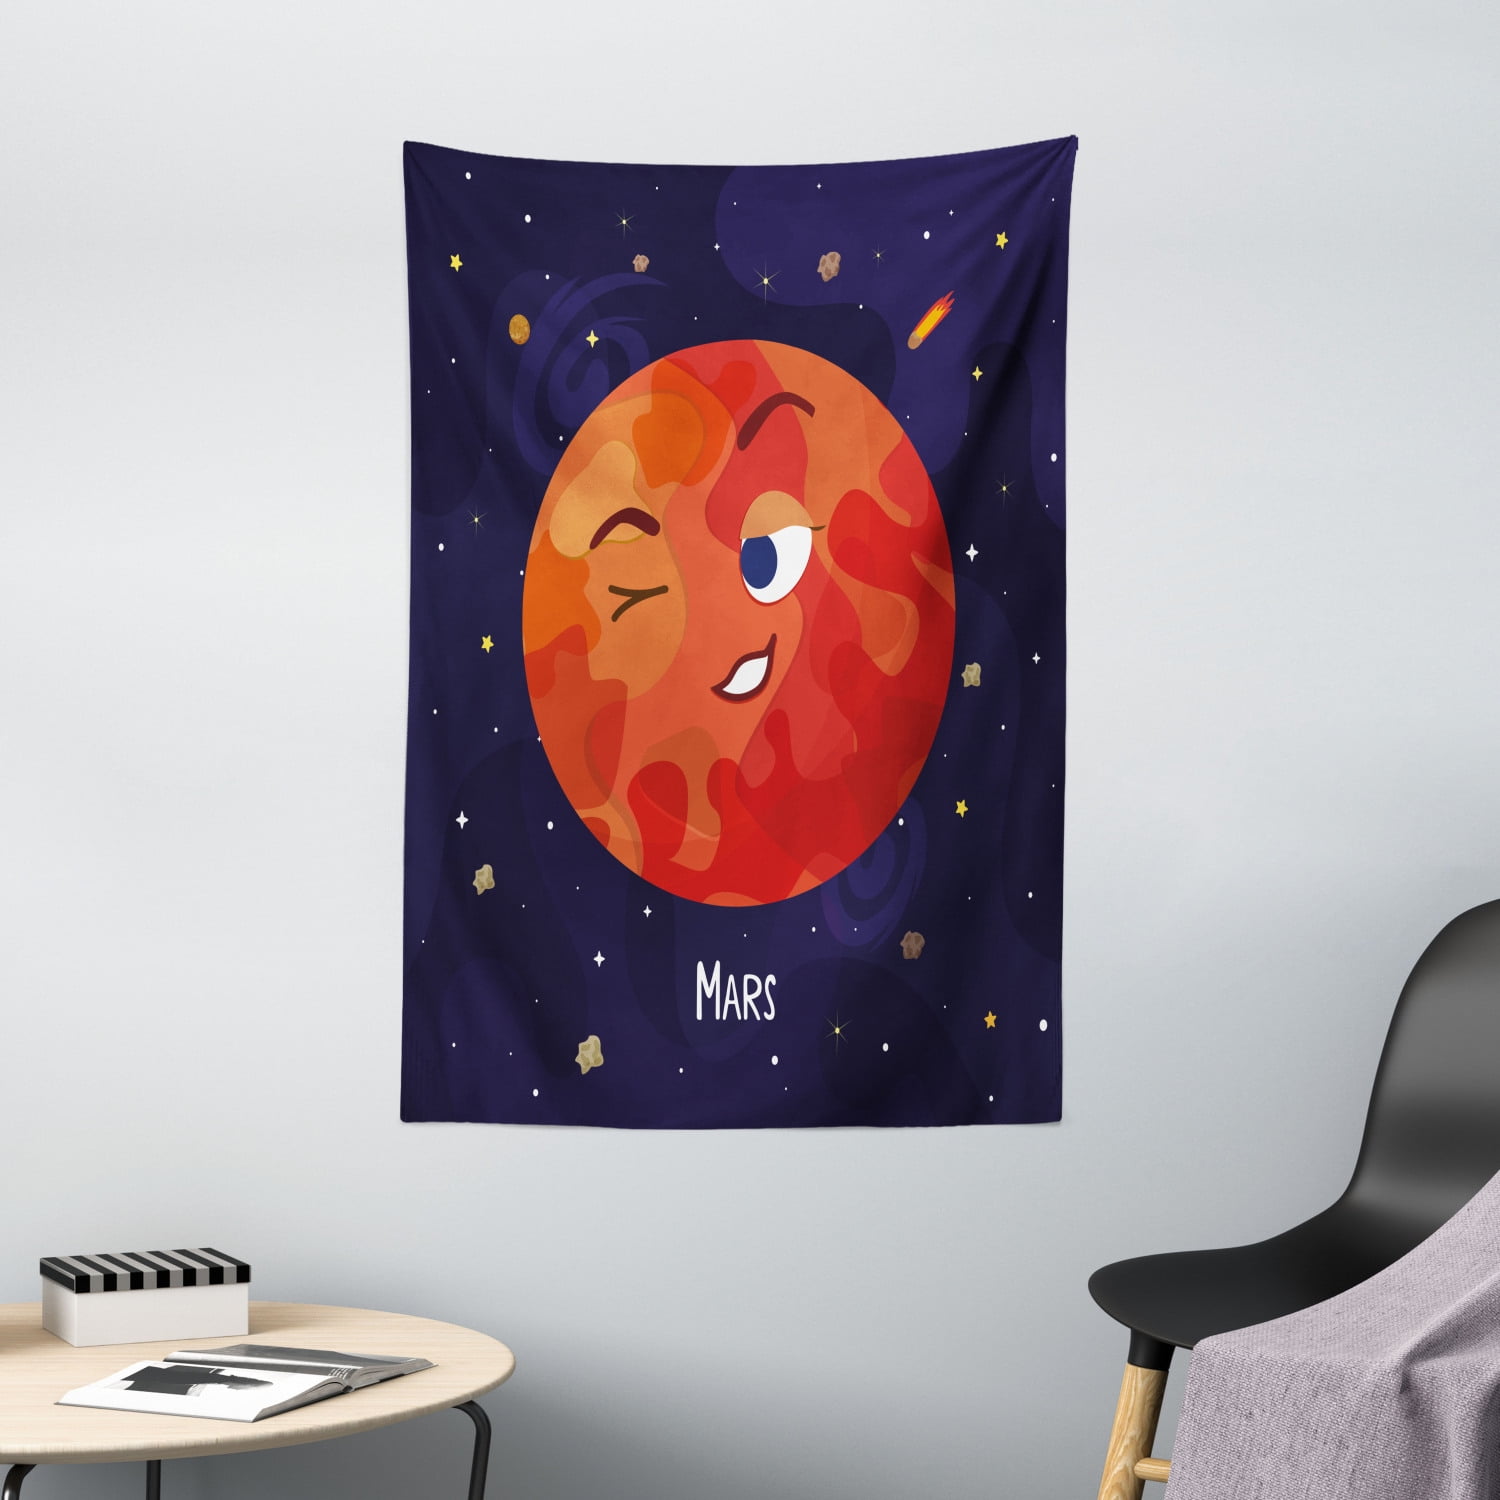 Mars Planet Tapestry Art Wall Hanging Sofa Table Bed Cover Home Decor 